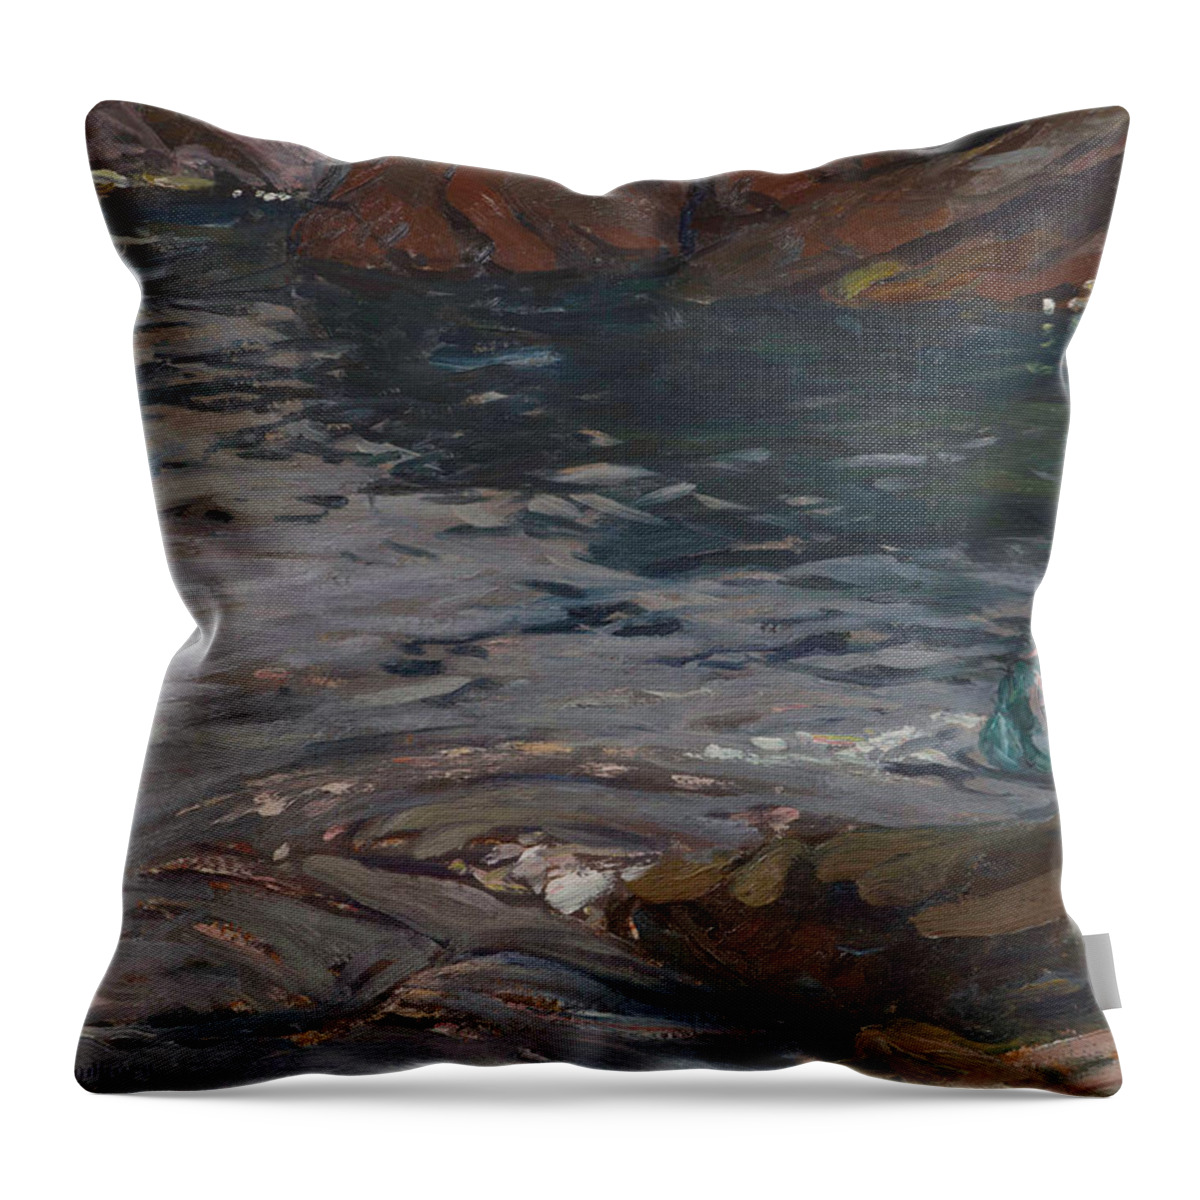 Bathing Pool Throw Pillow featuring the painting Bathing Pool by MotionAge Designs